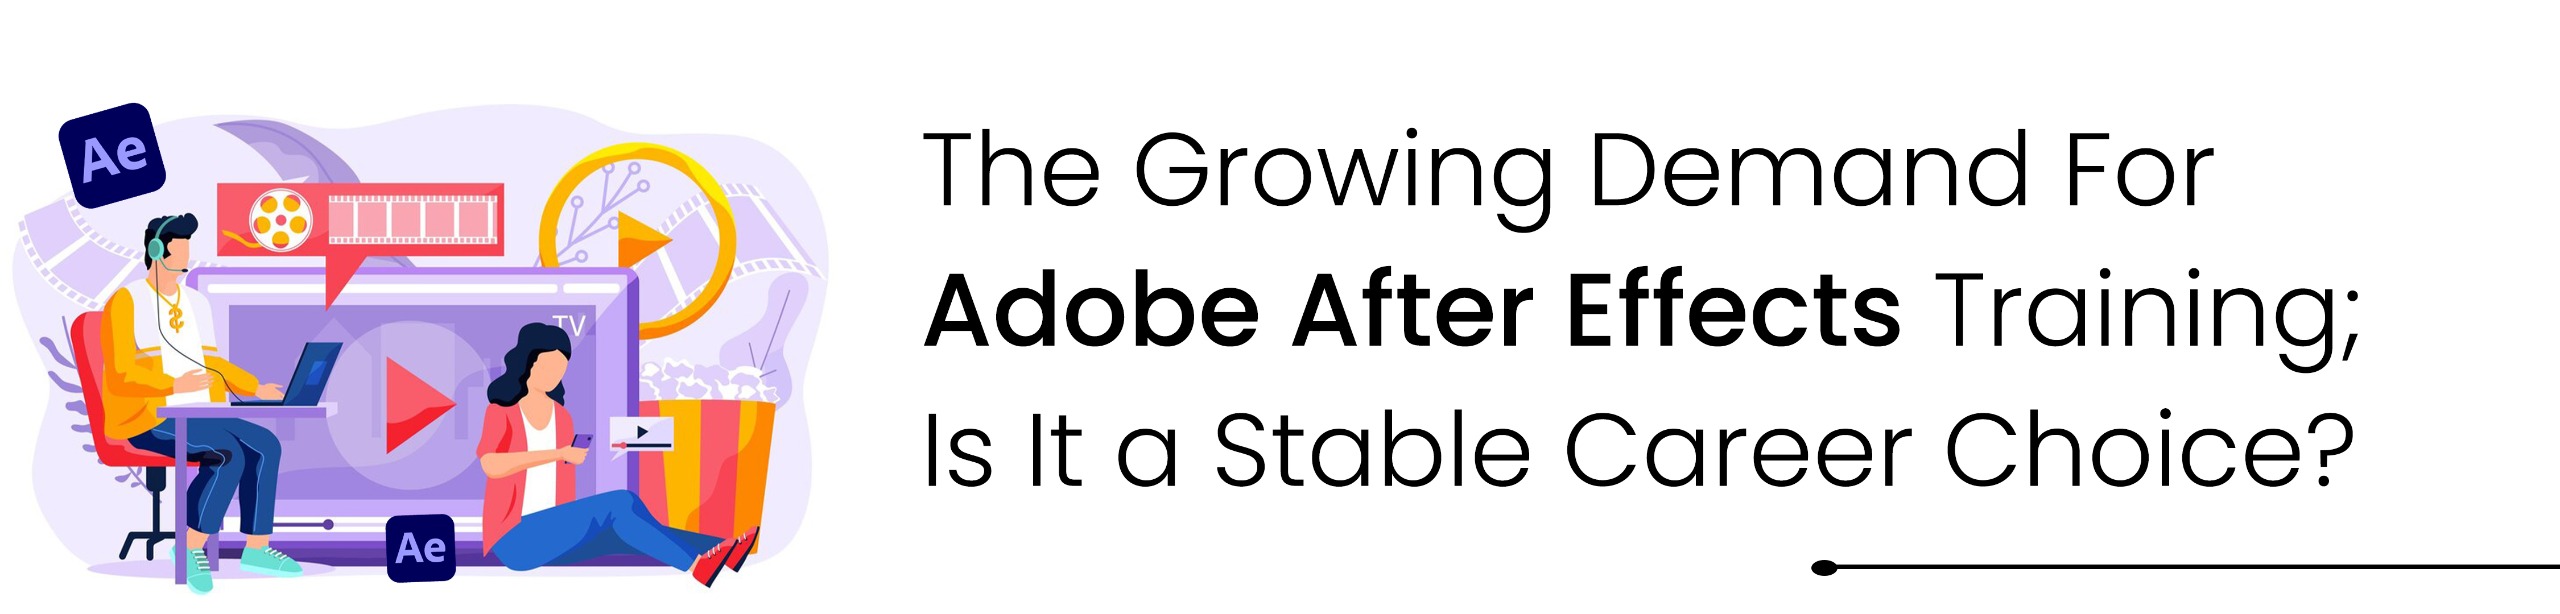 The Growing Demand For Adobe After Effects Training; Is It a Stable Career Choice?